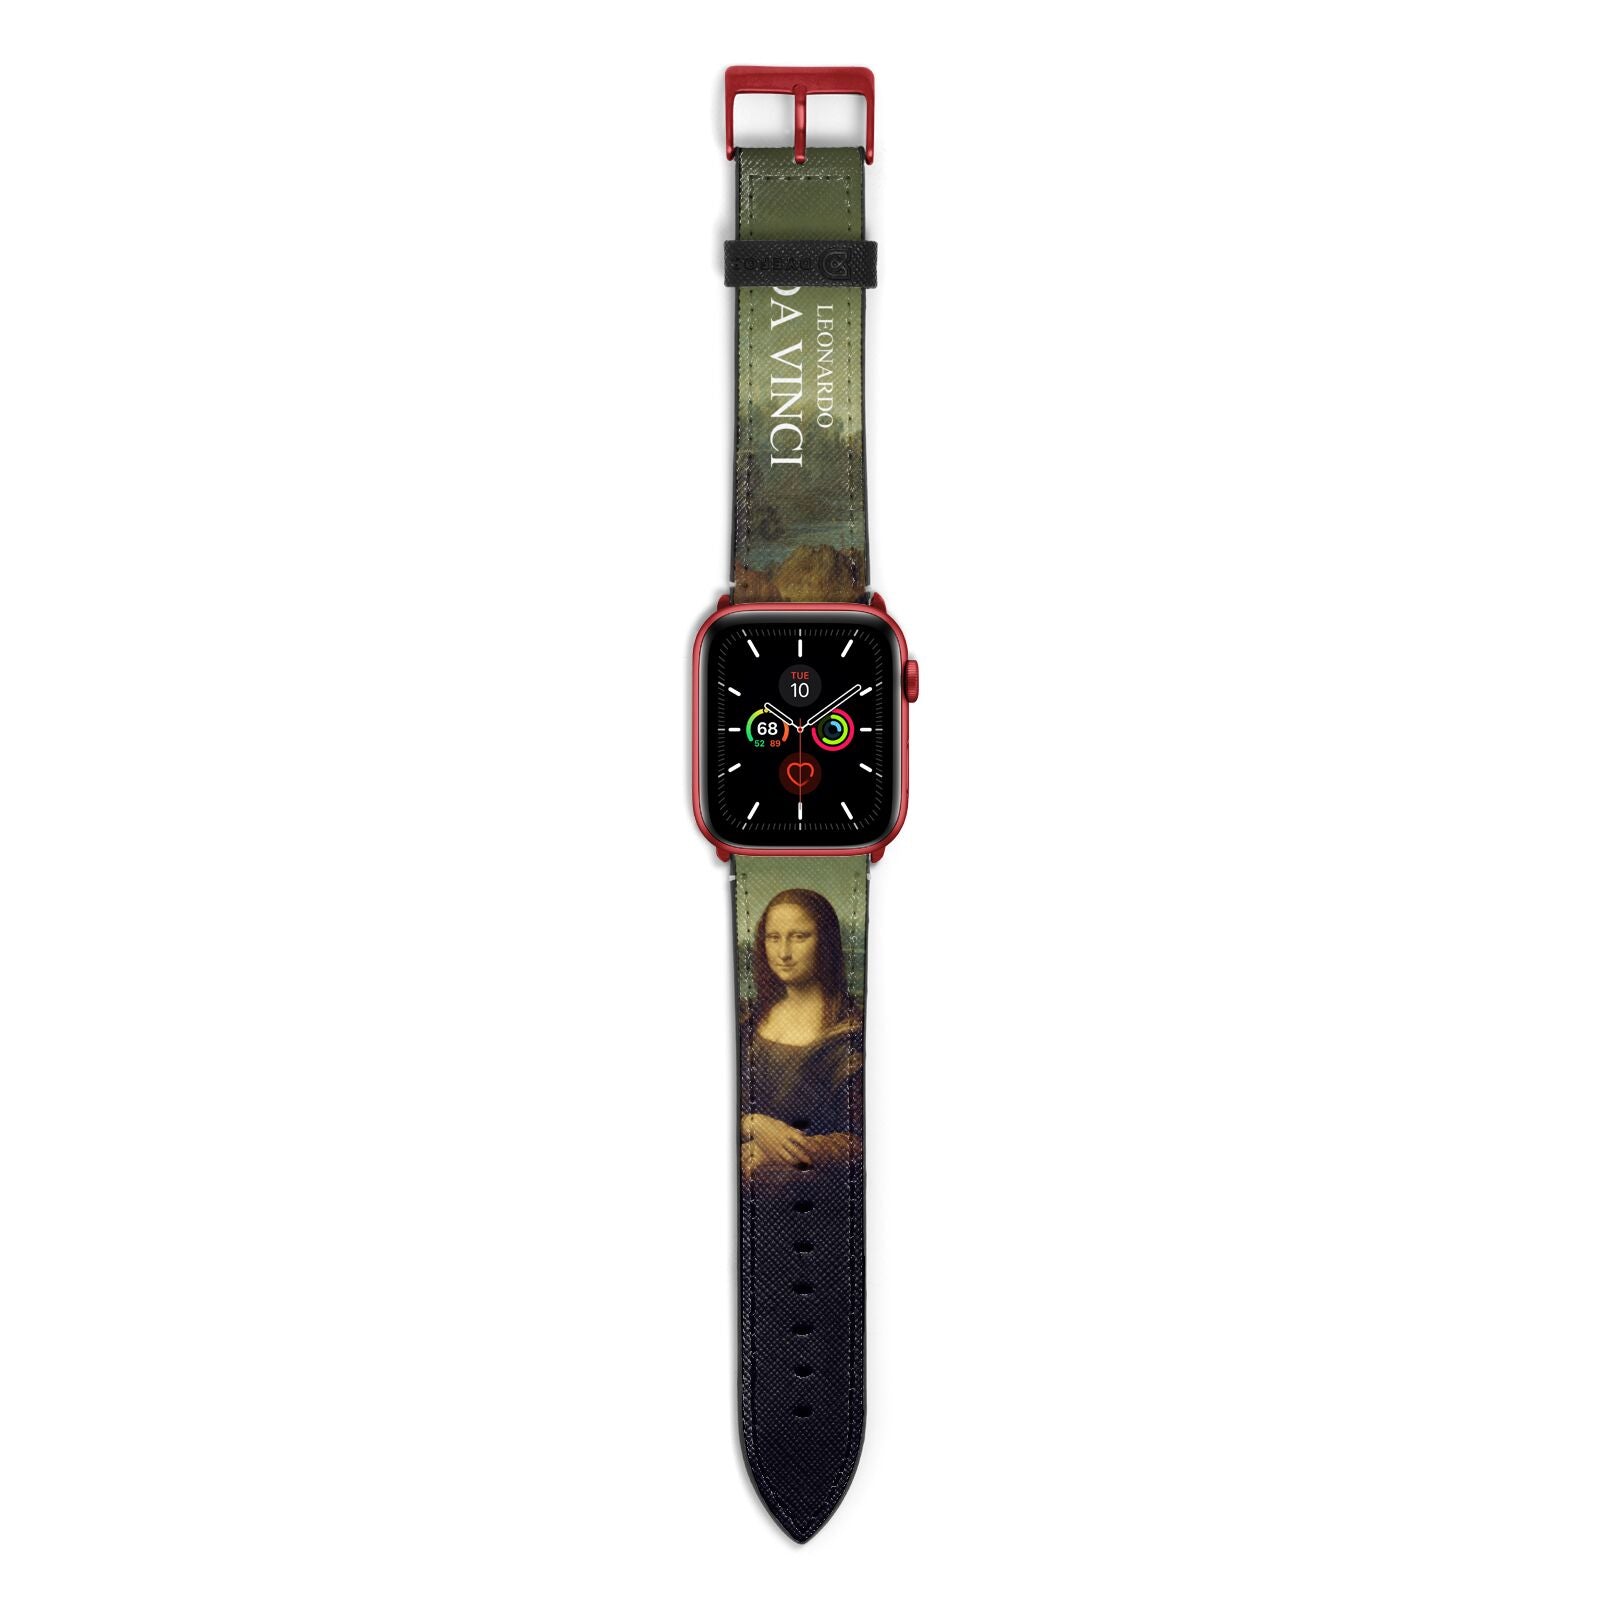 Mona Lisa By Da Vinci Apple Watch Strap with Red Hardware